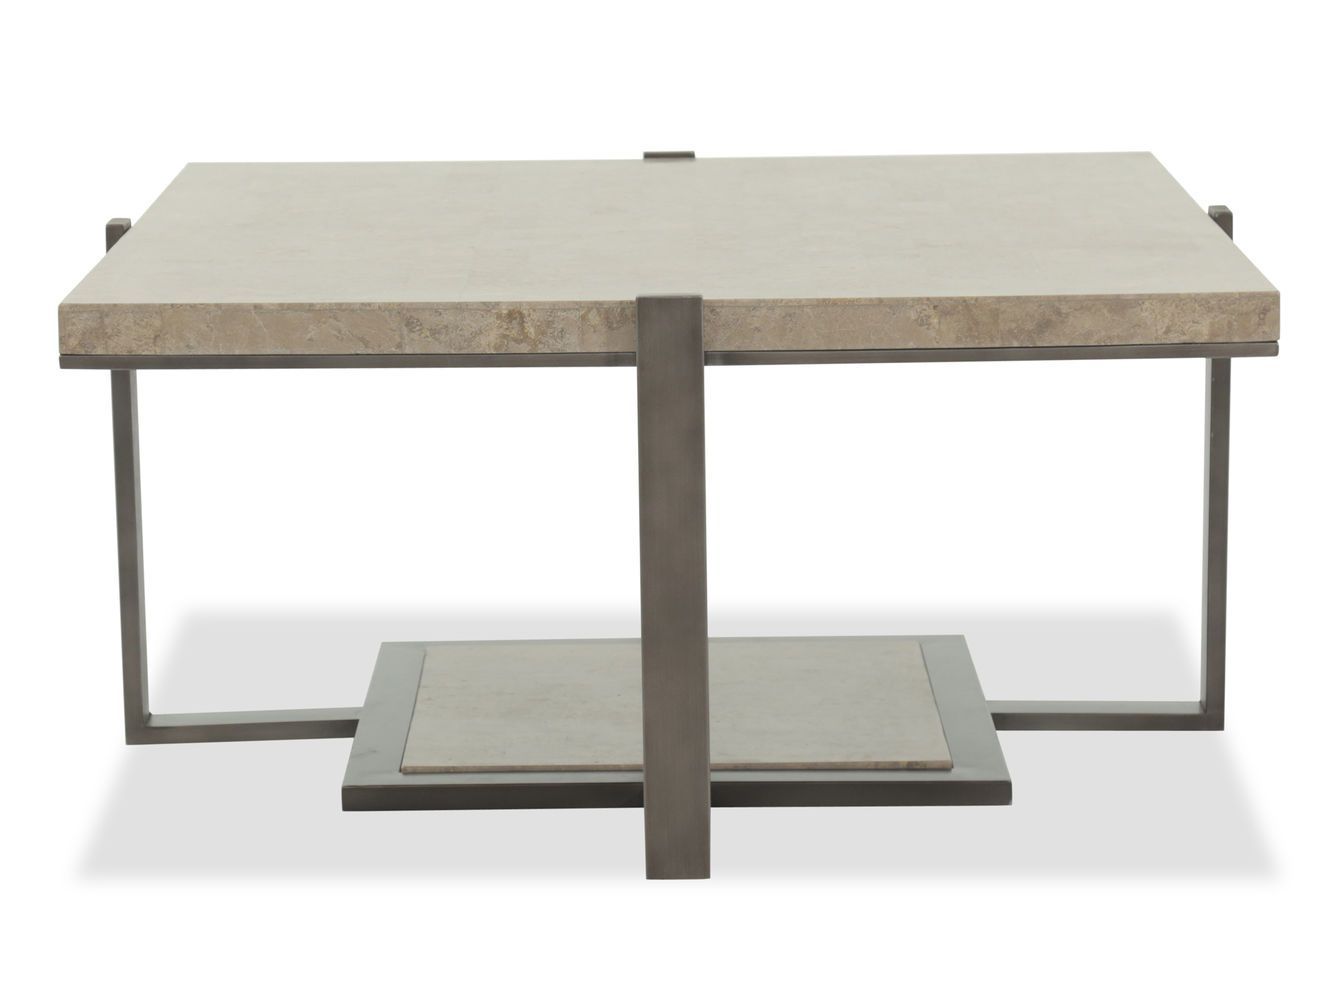 Square Modern Cocktail Table In Gray | Modern Cocktail Tables, Coffee Throughout Hassch Modern Square Cocktail Tables (Gallery 5 of 20)